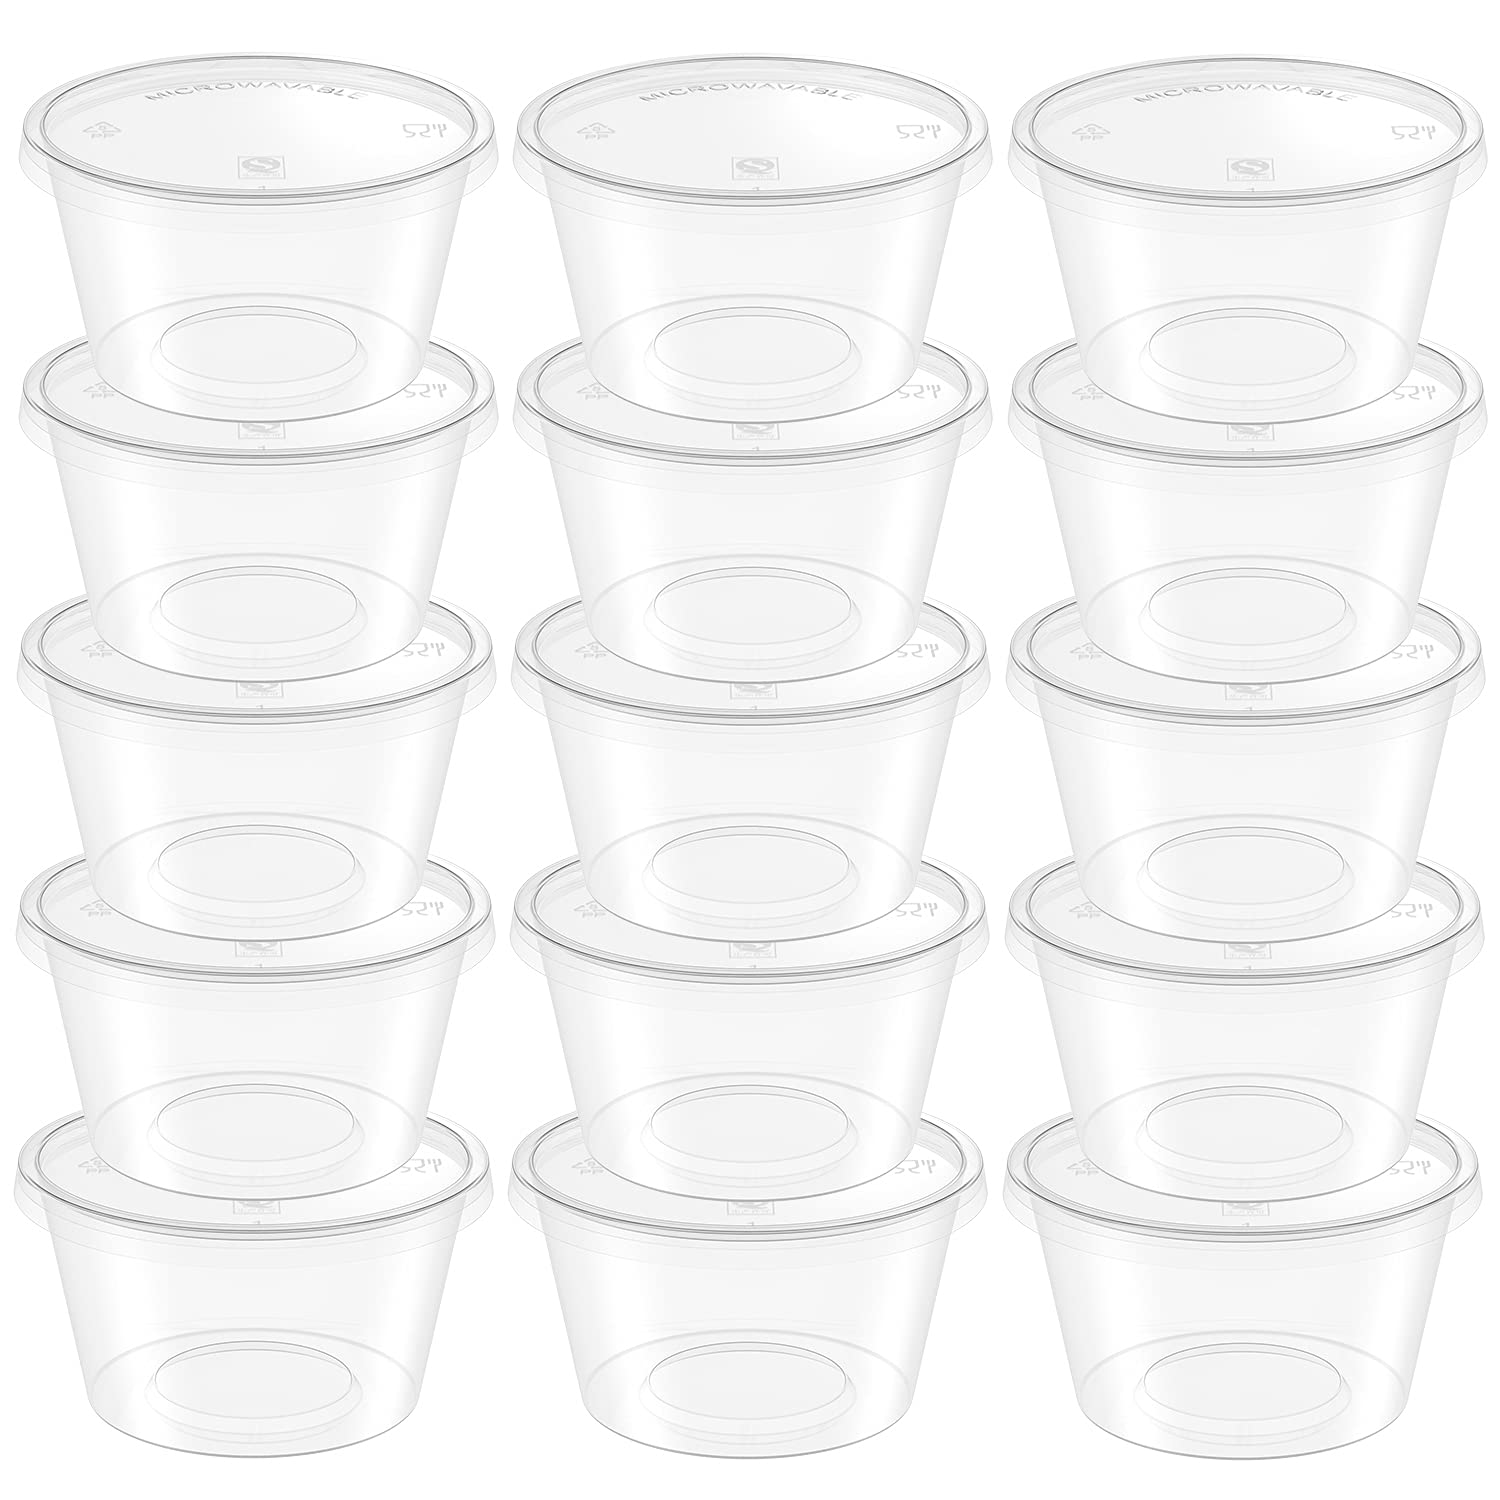 XINGLIAN 50 Pack 4 Ounce Clear Slime Foam Ball Storage Containers